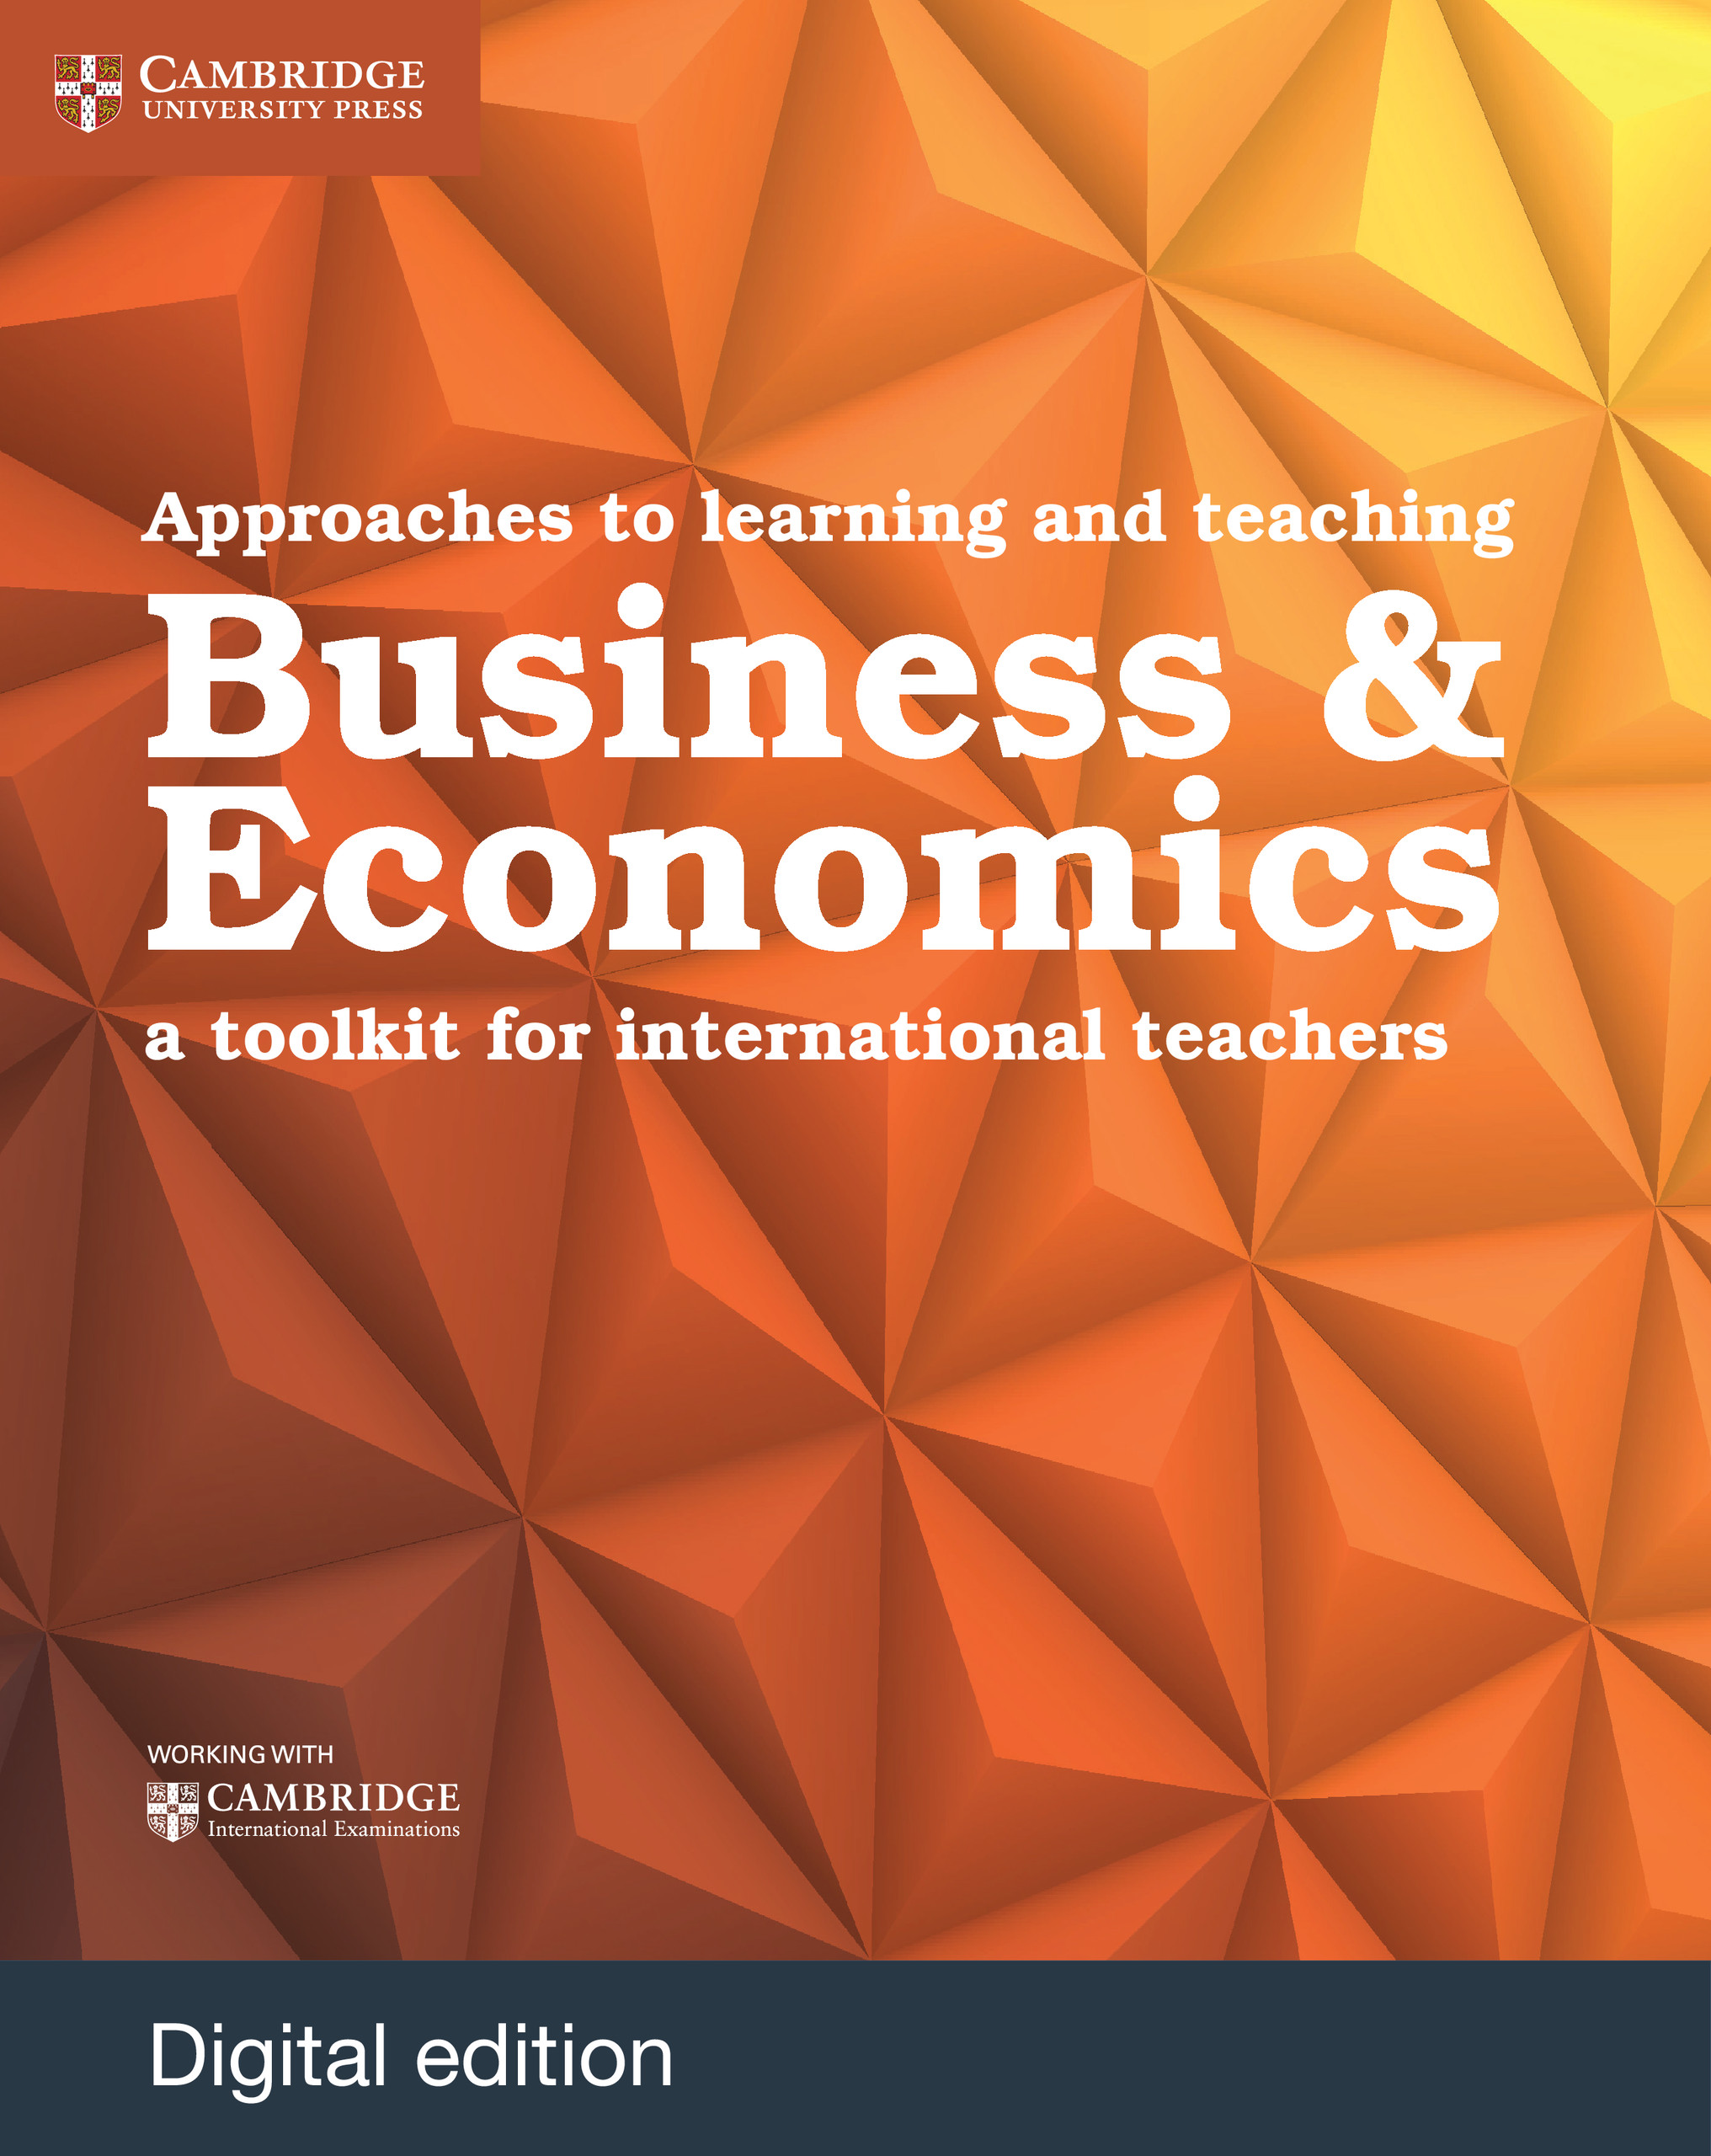 International Approaches to Teaching and Learning Business & Economics